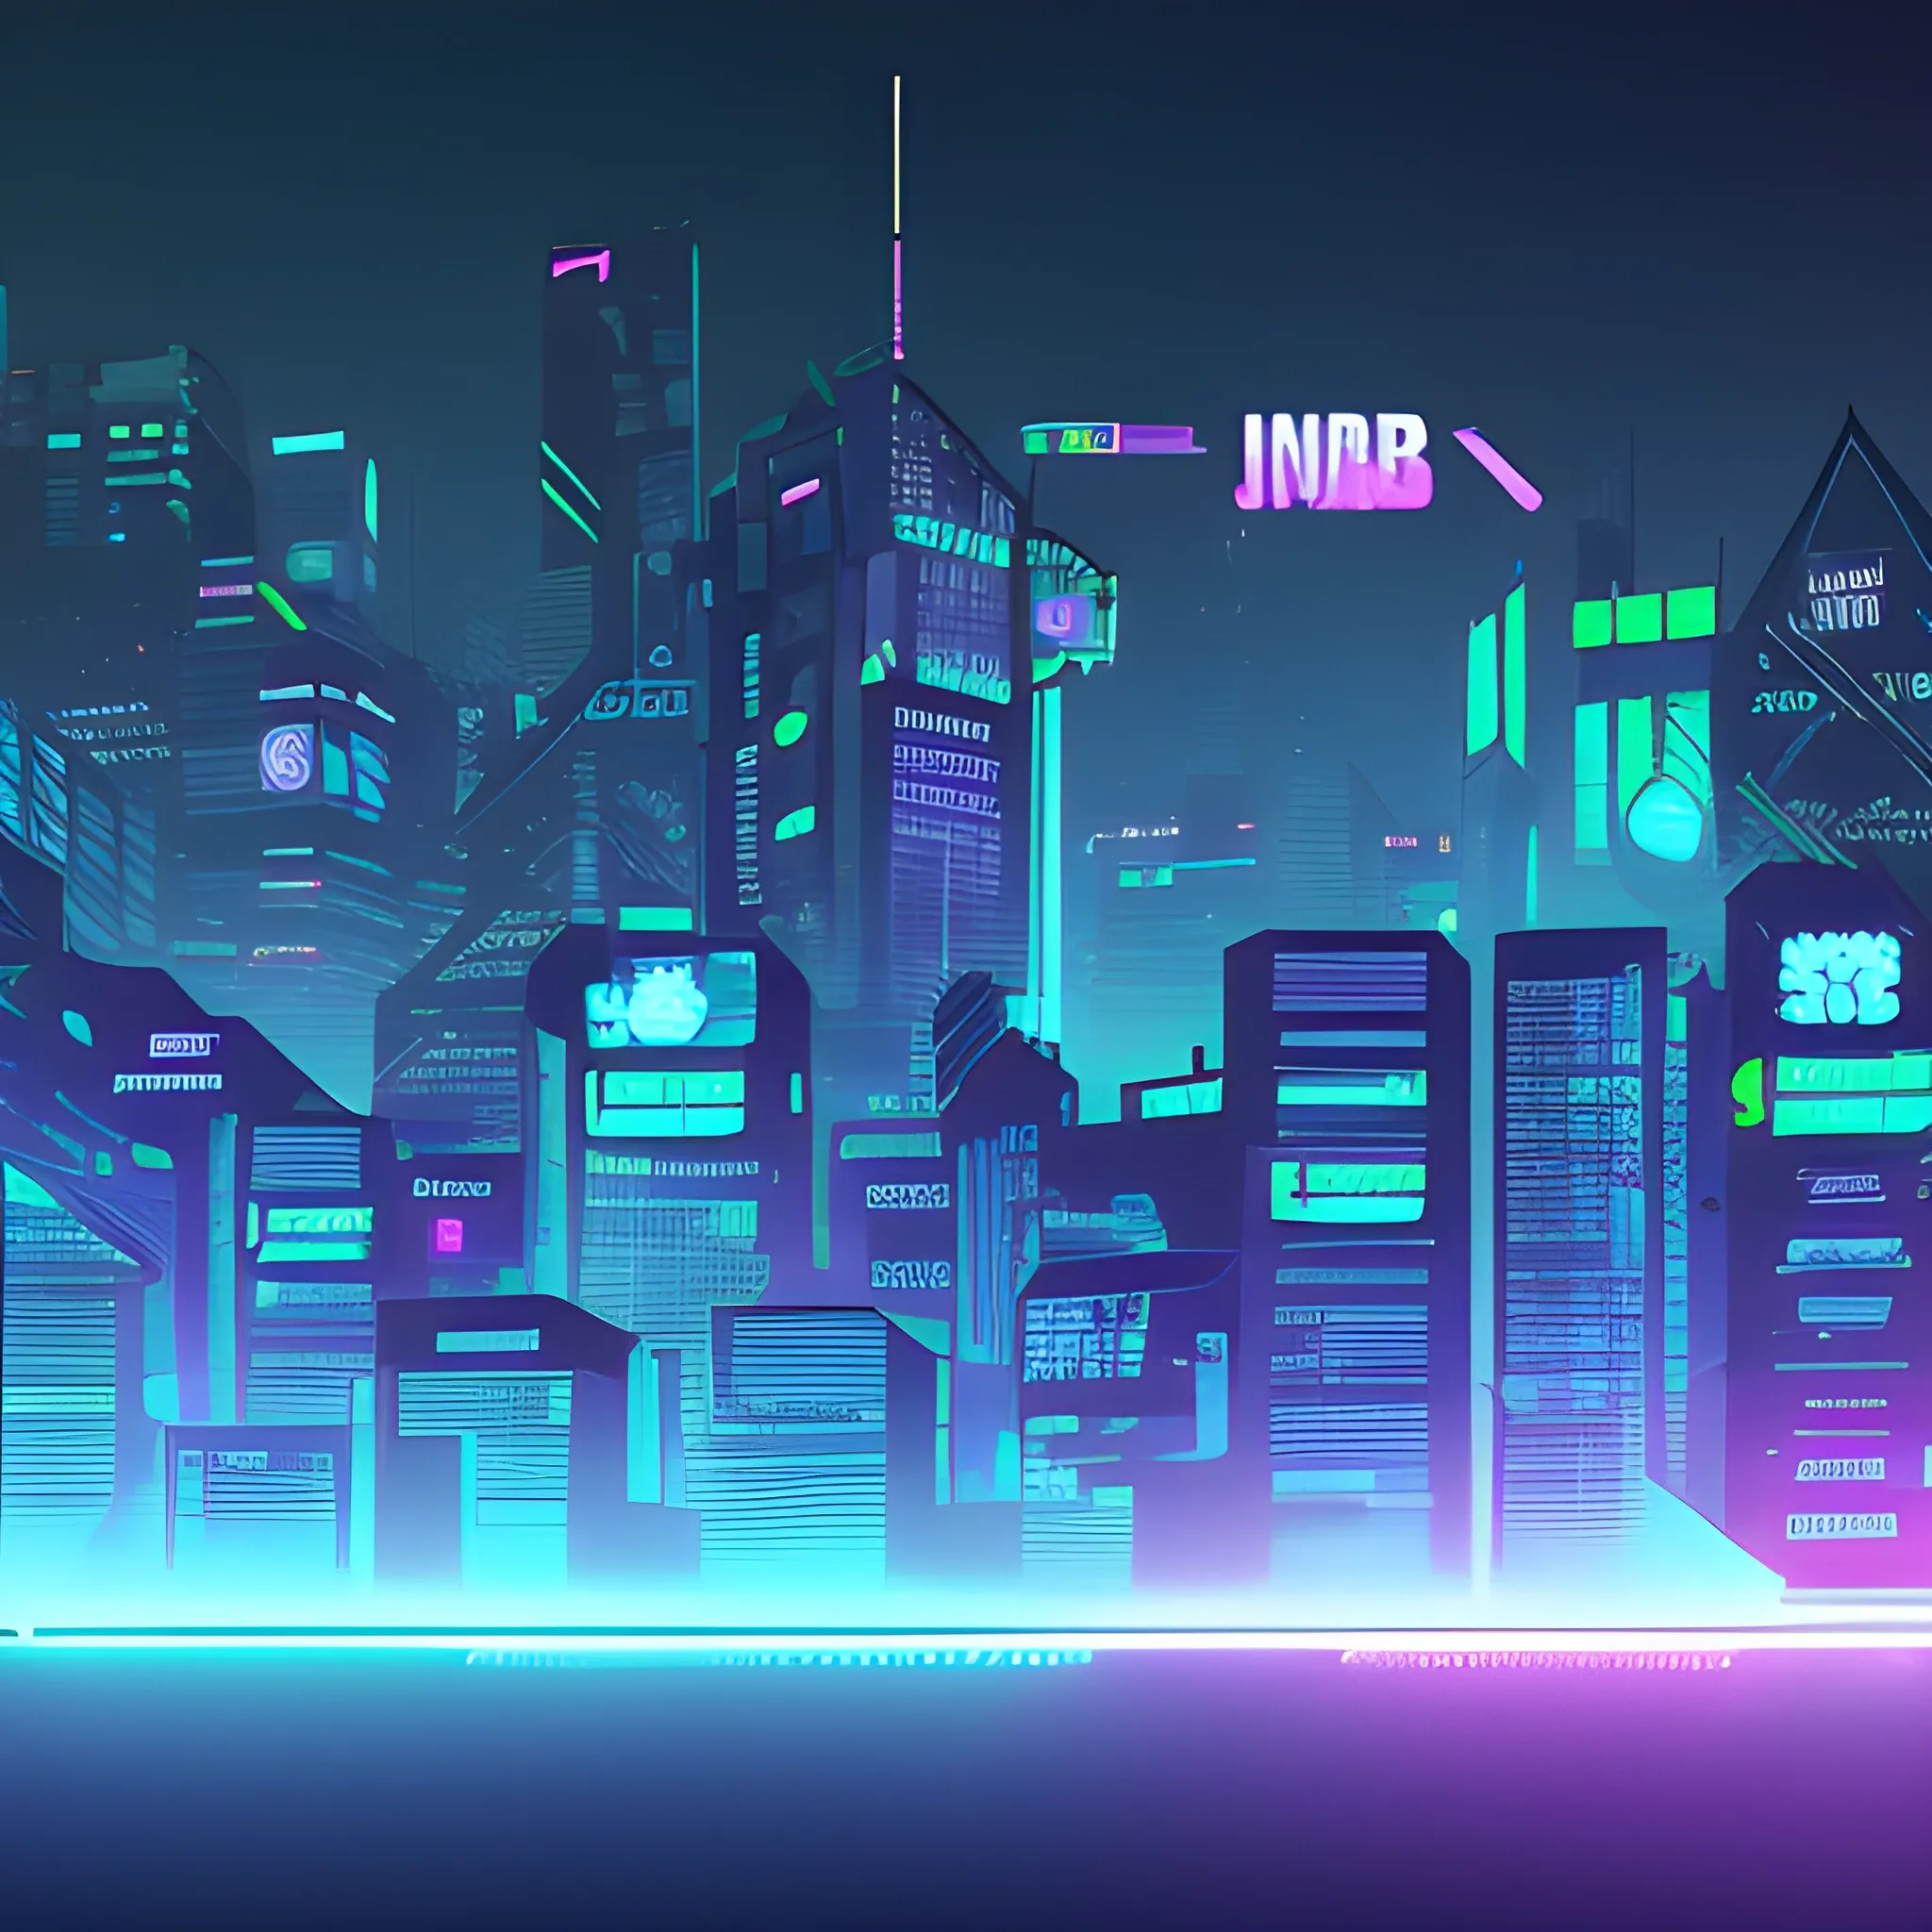 image for the backgroound web page for a web development company, the image with cyberpunk style